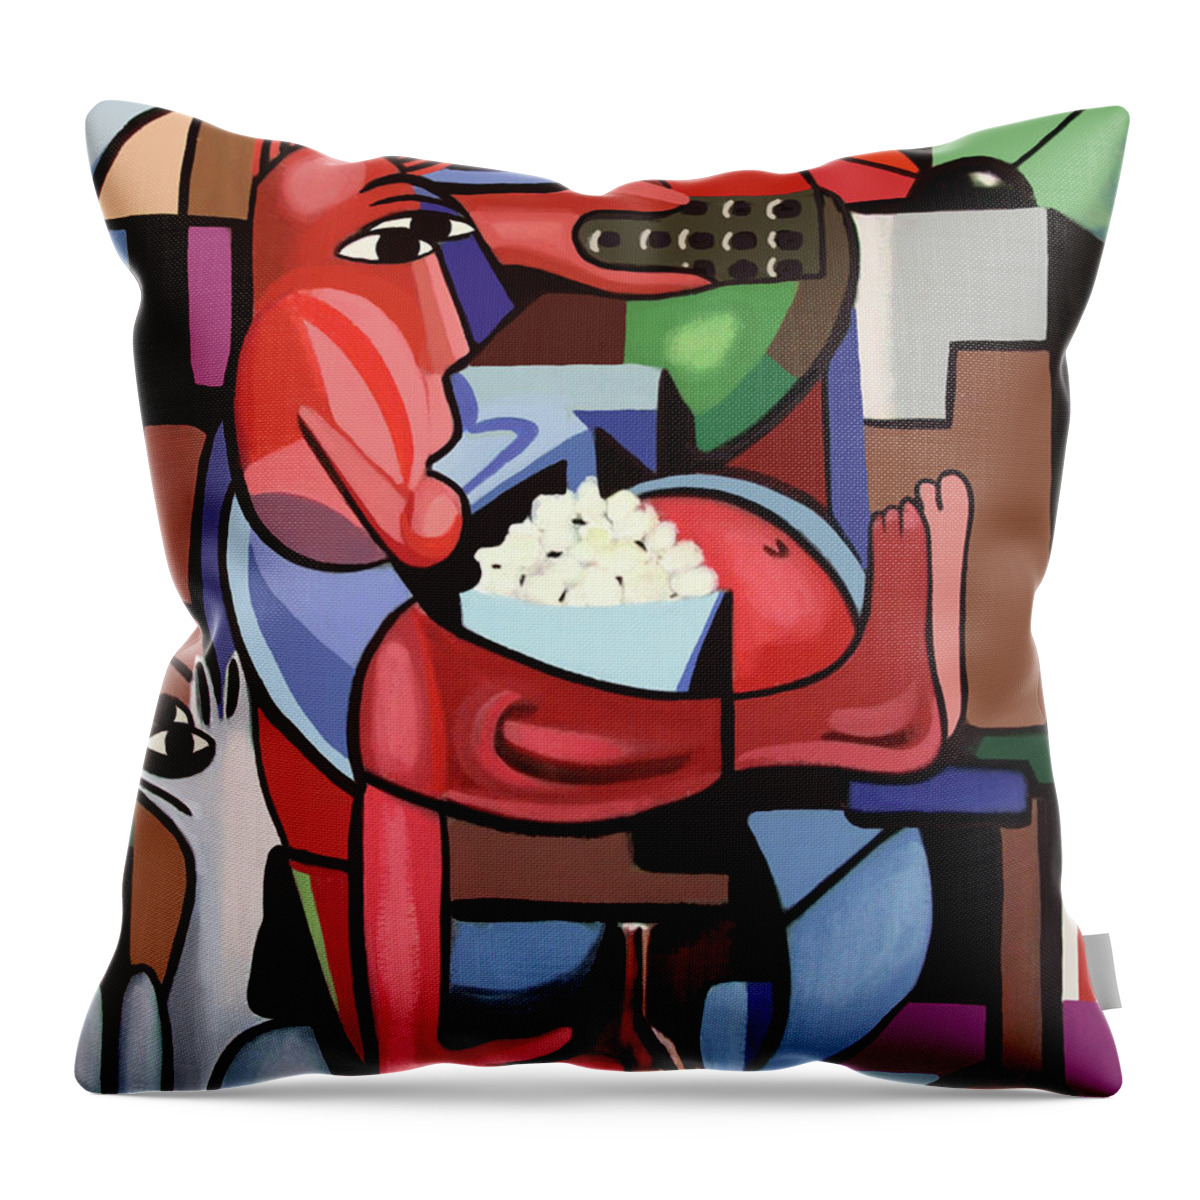 Cubism Throw Pillow featuring the painting Assuming The Position by Anthony Falbo